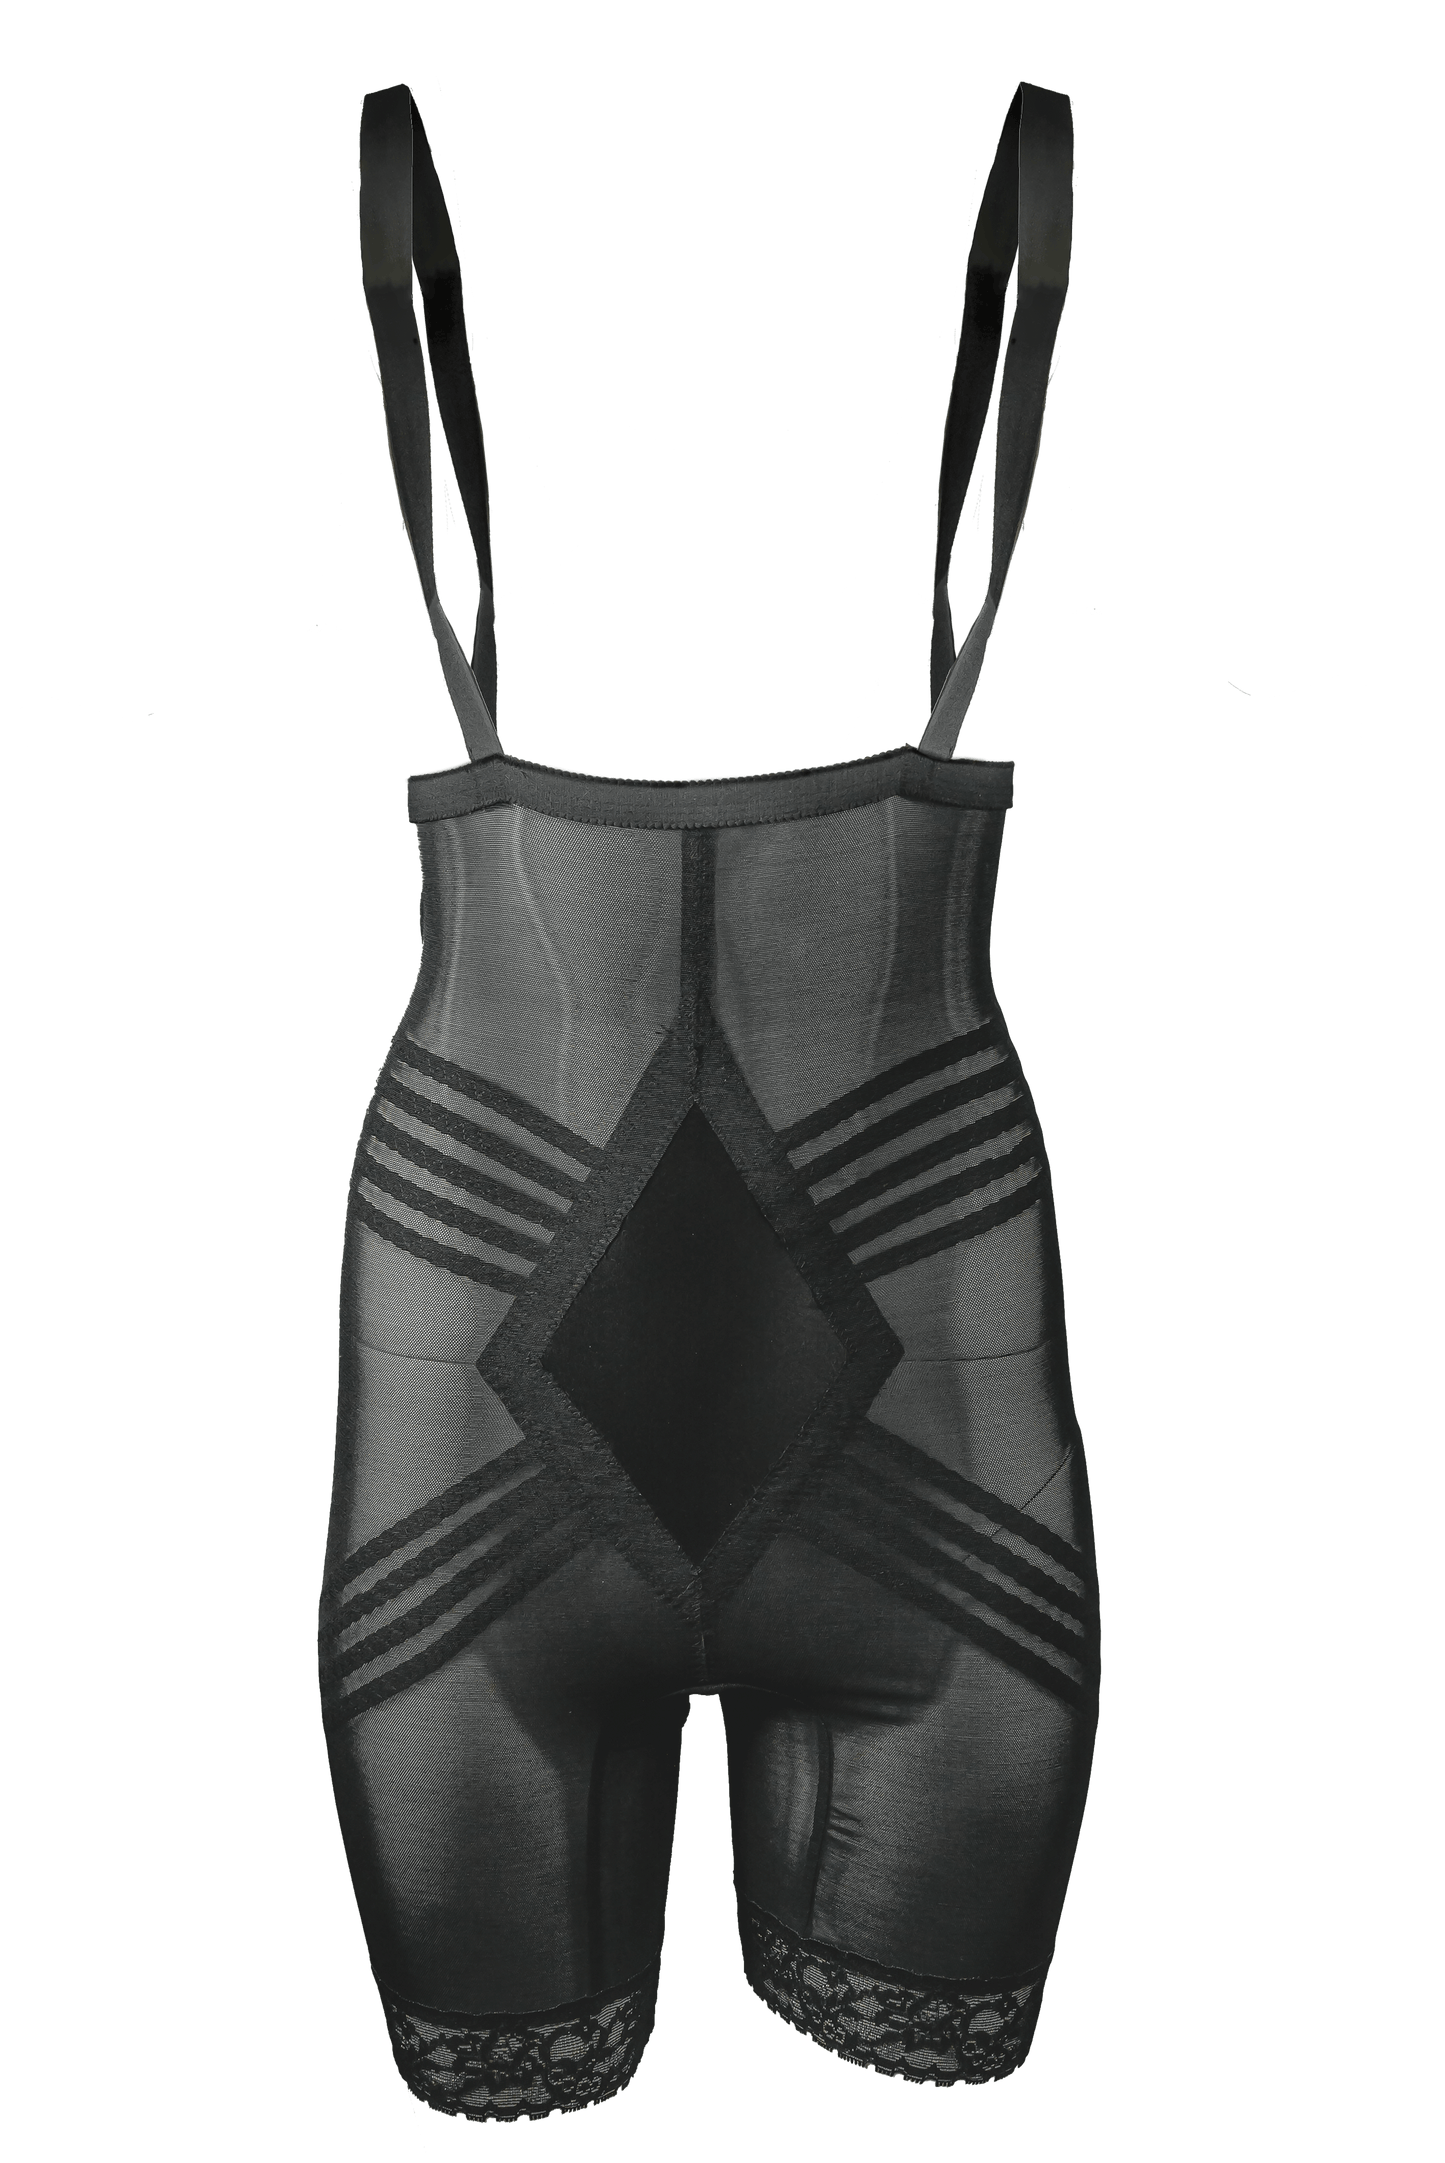 RAGO 9077 - BODY BRIEFER EXTRA FIRM SHAPING